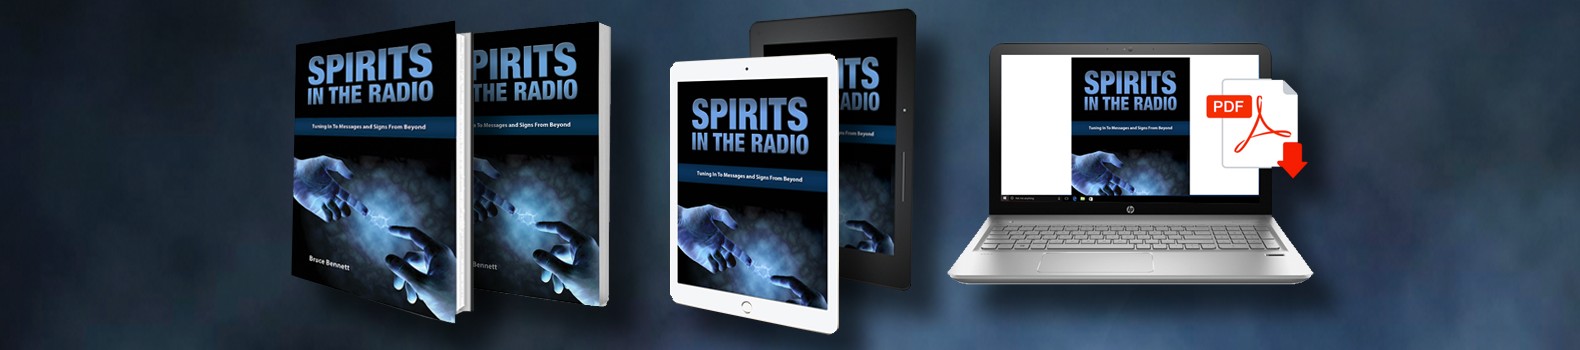 Spirits in the Radio Web Site